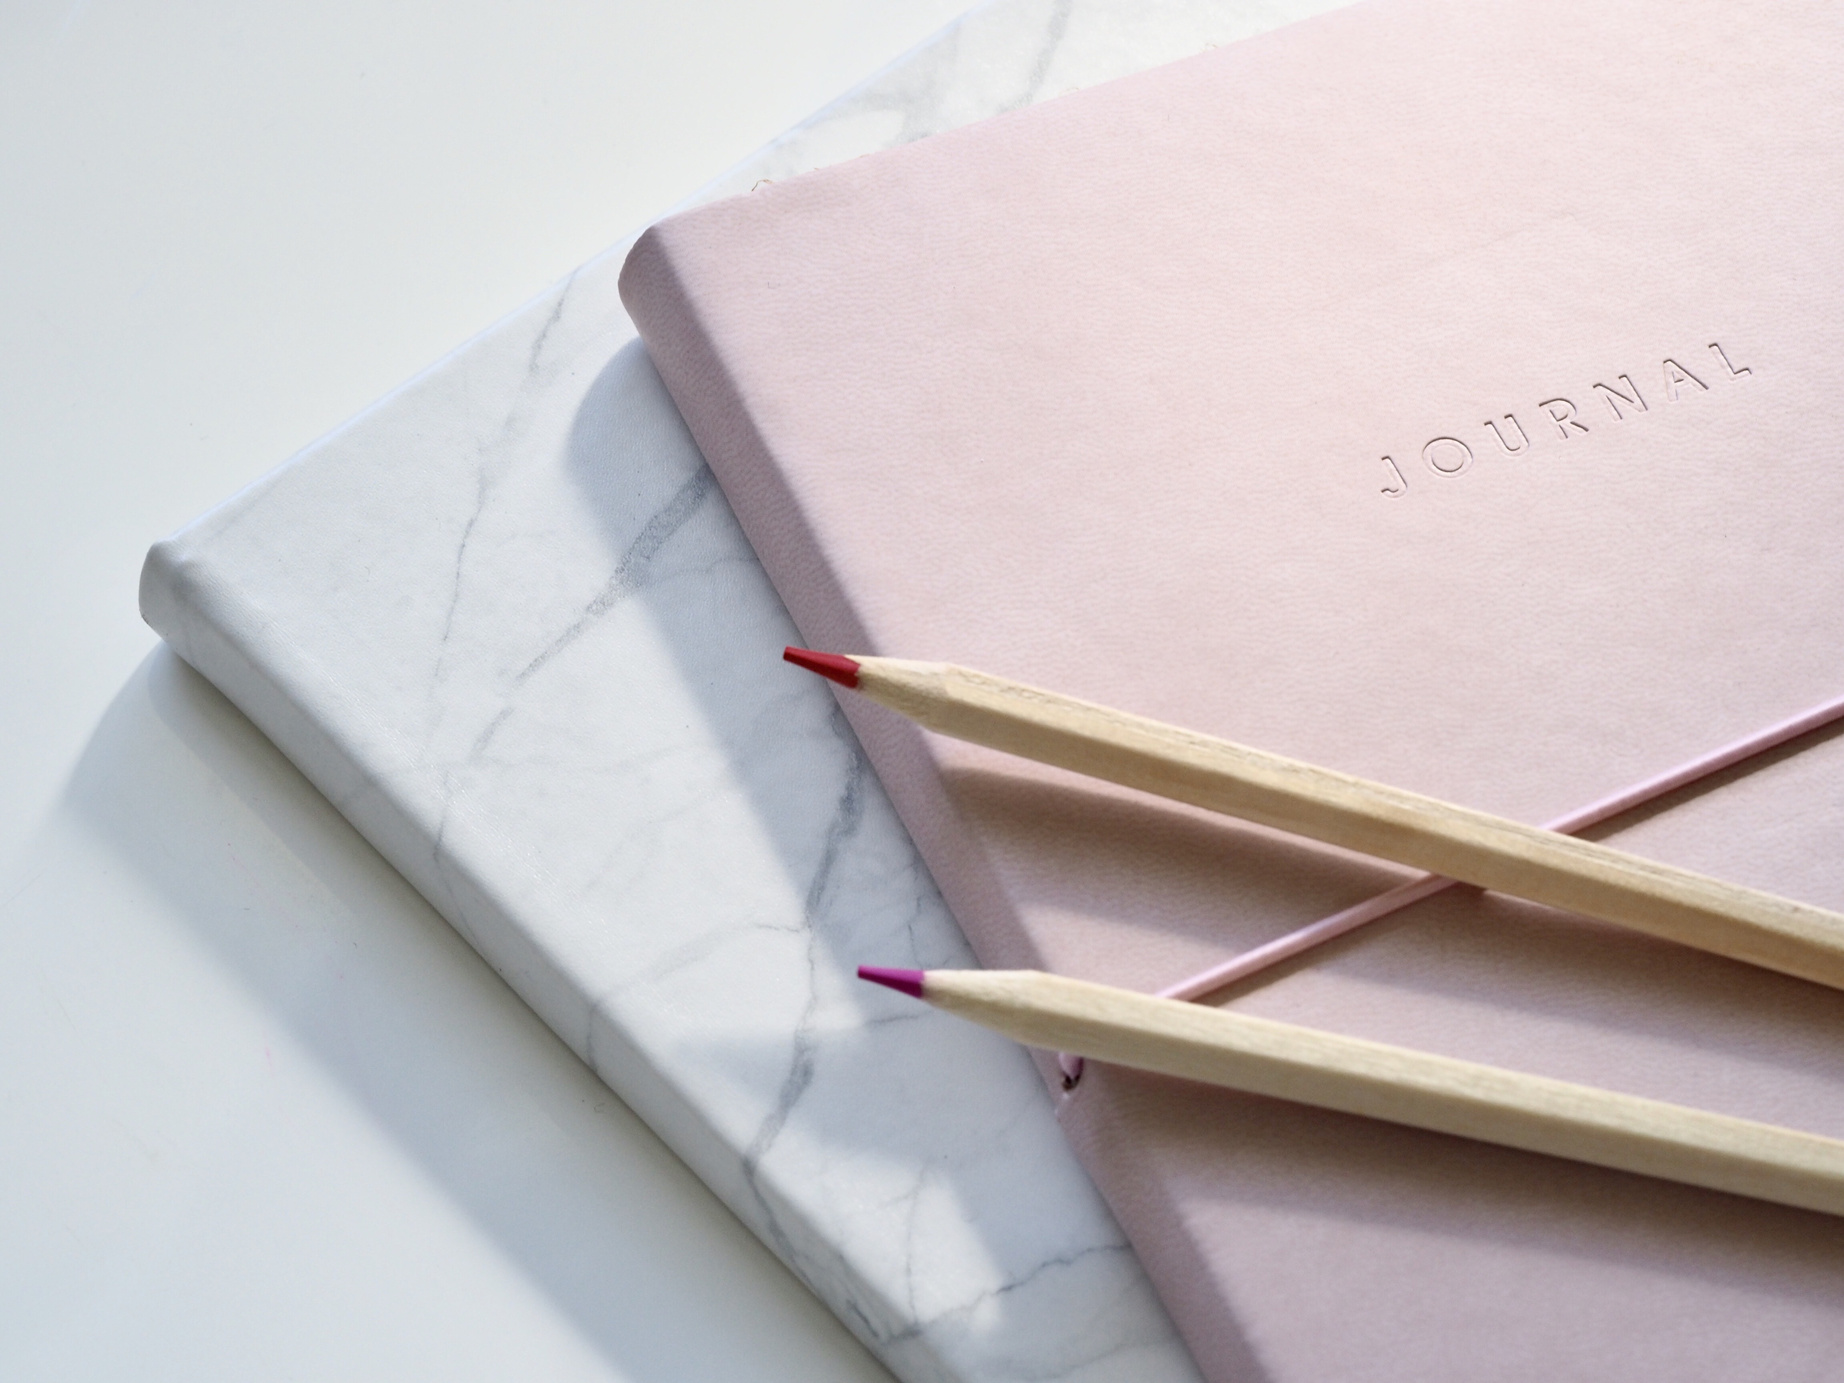 Modern Minimalist Style Journals and Colored Pencils